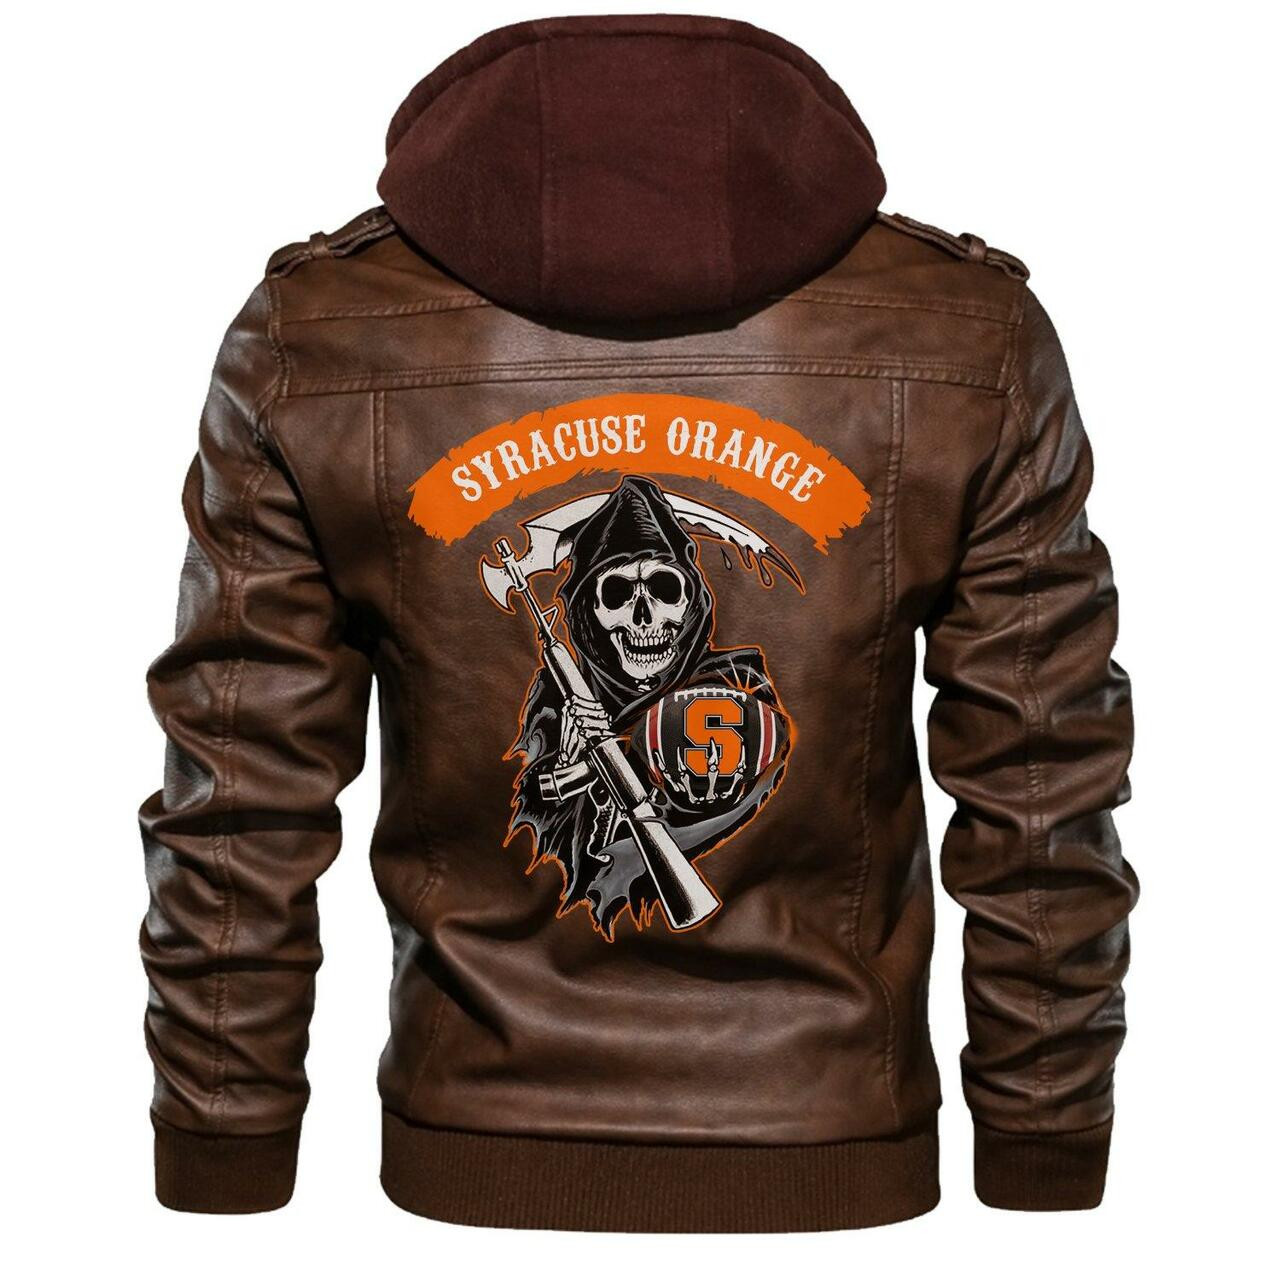 Don't wait another minute, Get Hot Leather Jacket today 12